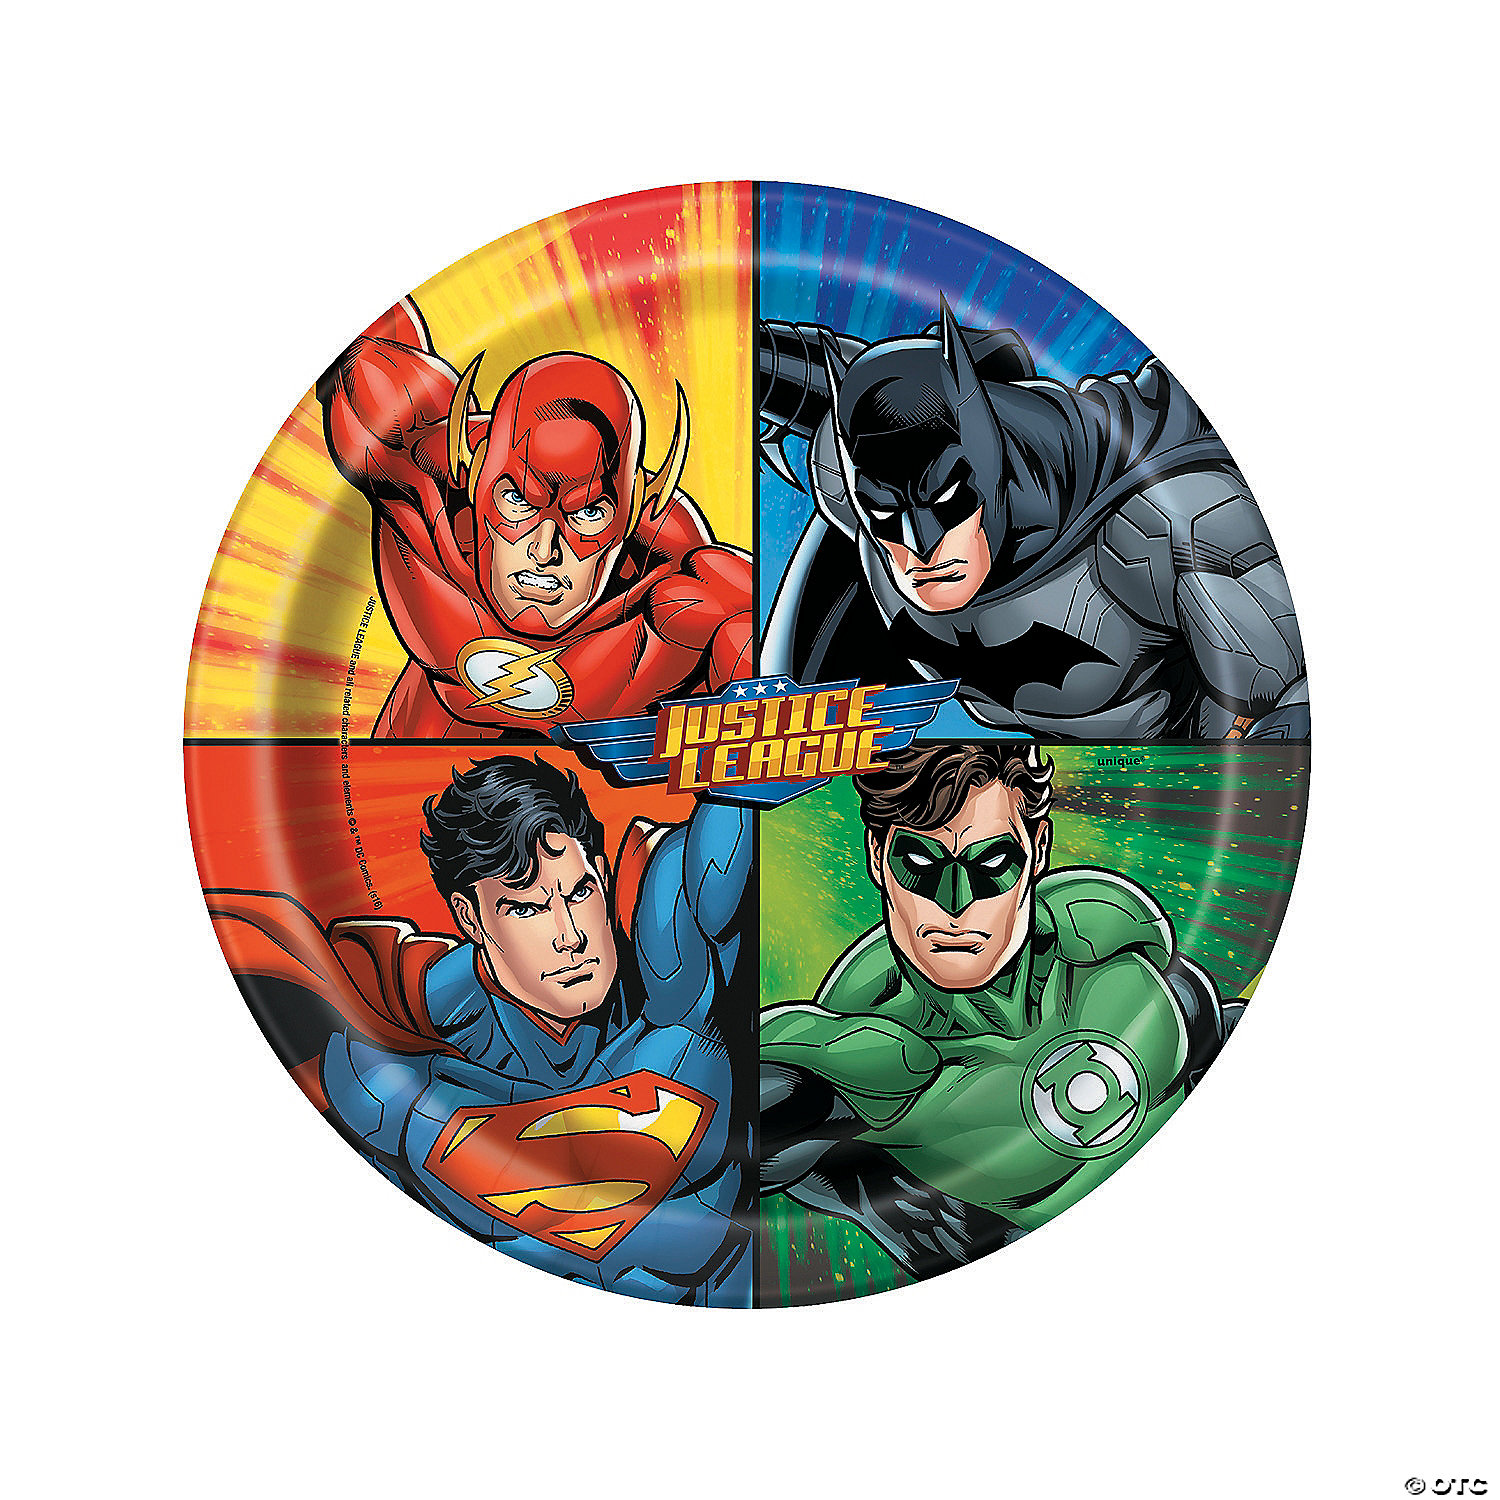 Balloons Banners Justice League Cartoon Party Supplies Tableware Decorations